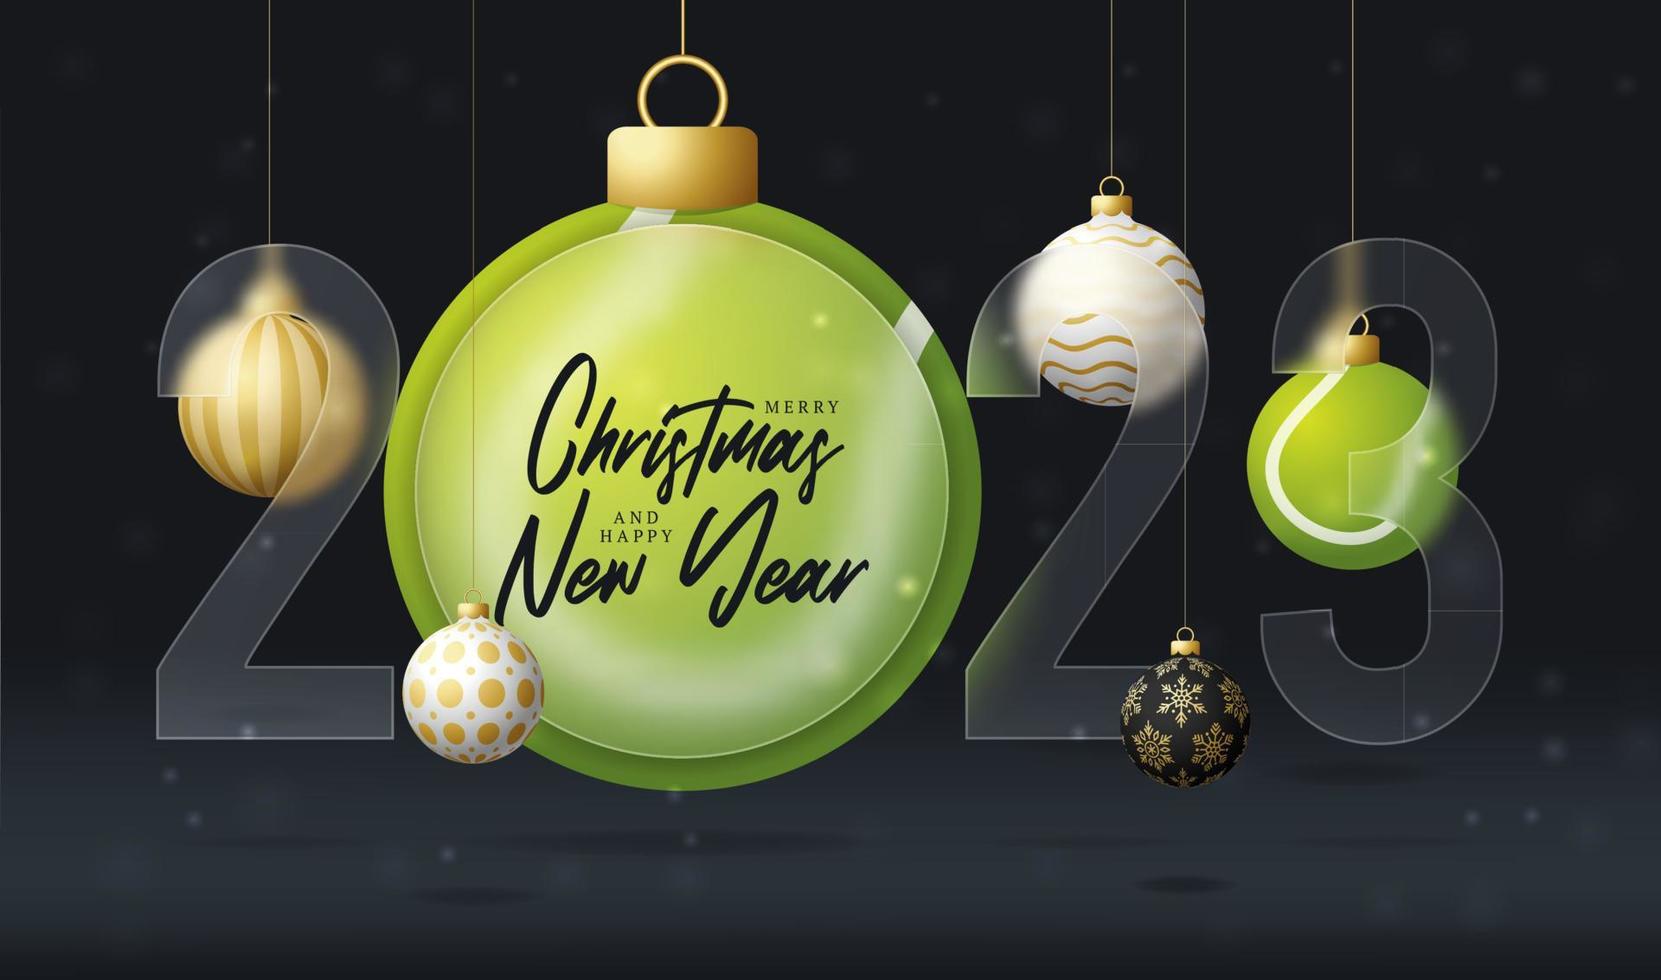 Tennis 2023 sale banner or greeting card. Merry Christmas and happy new year 2023 sport banner with glassmorphism or glass-morphism blur effect. Realistic vector illustration